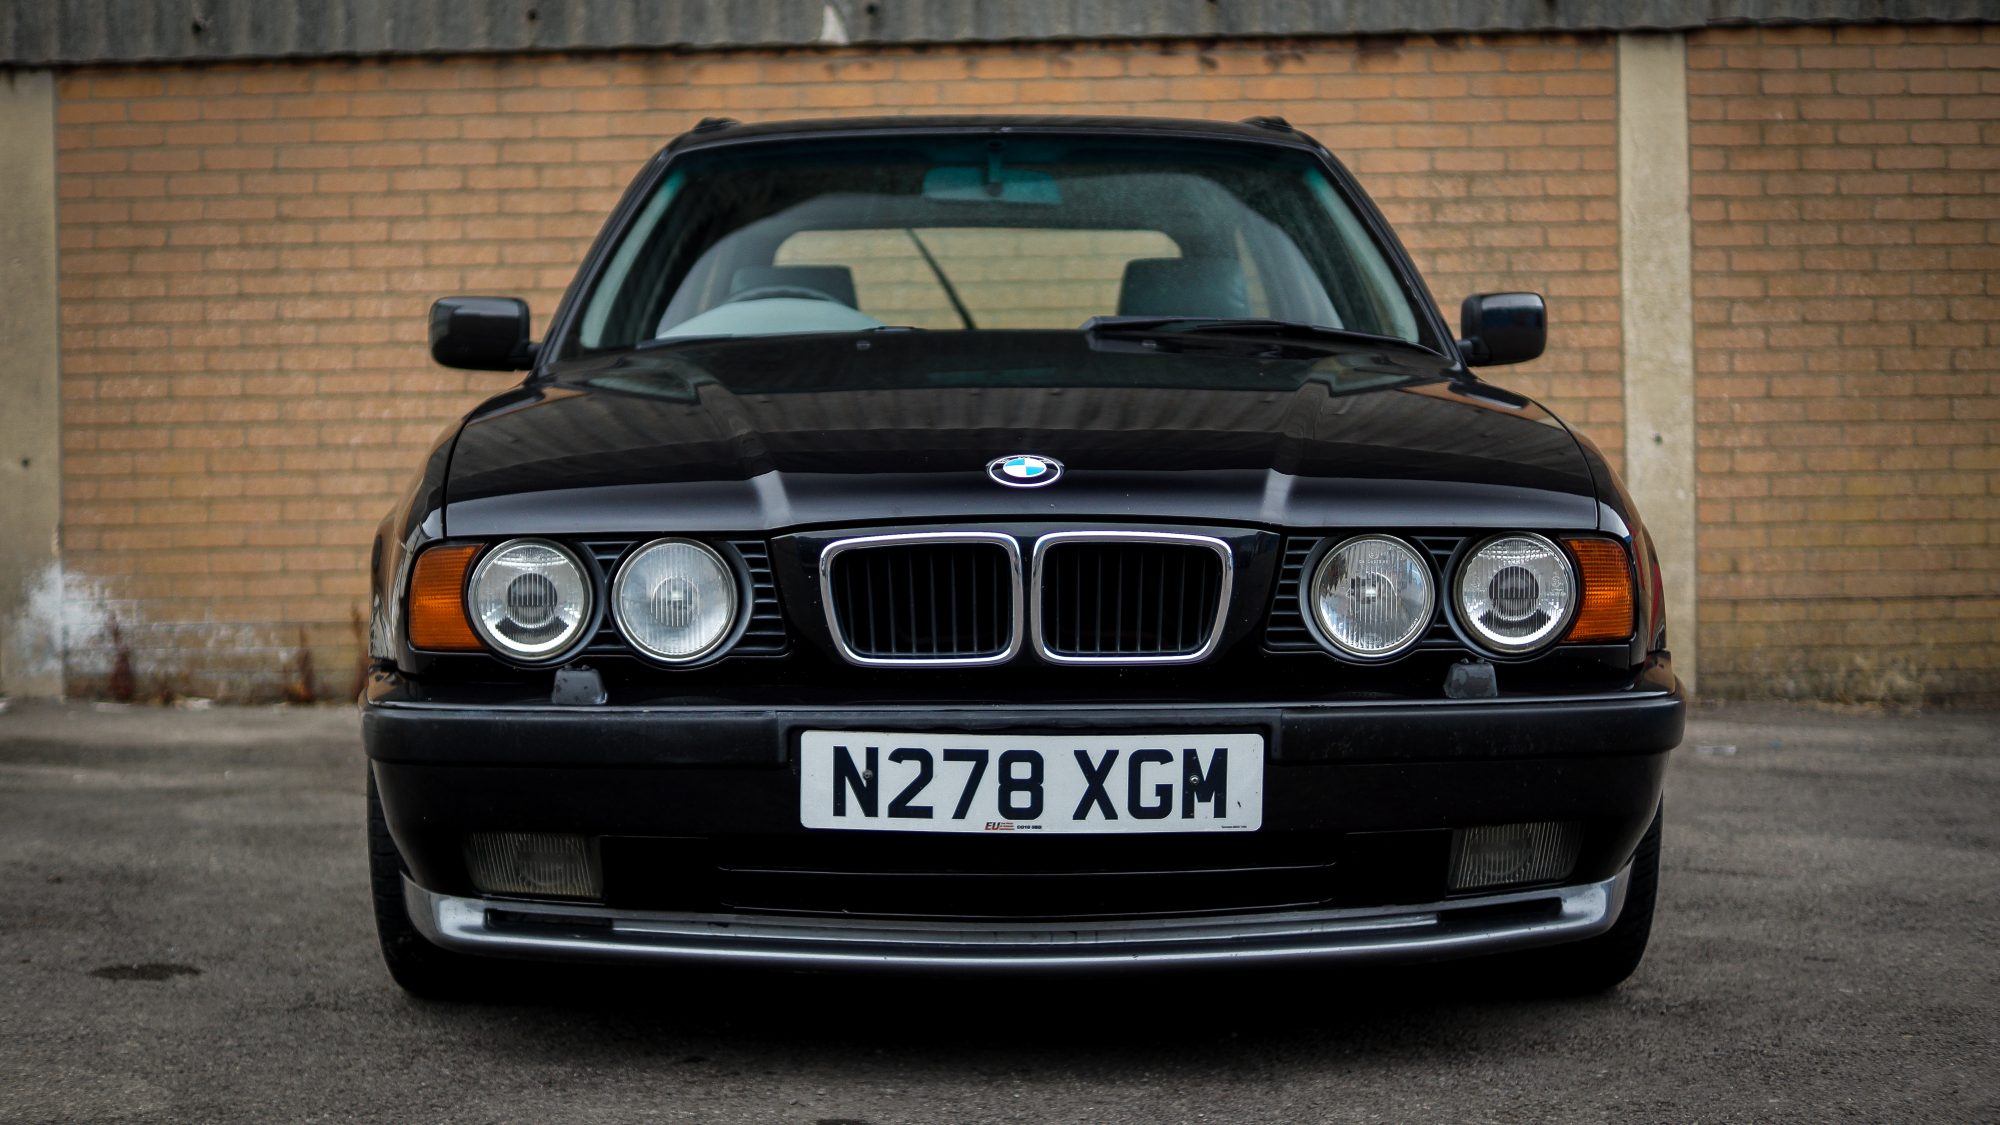 BMW E34 Touring – It's Top Gear